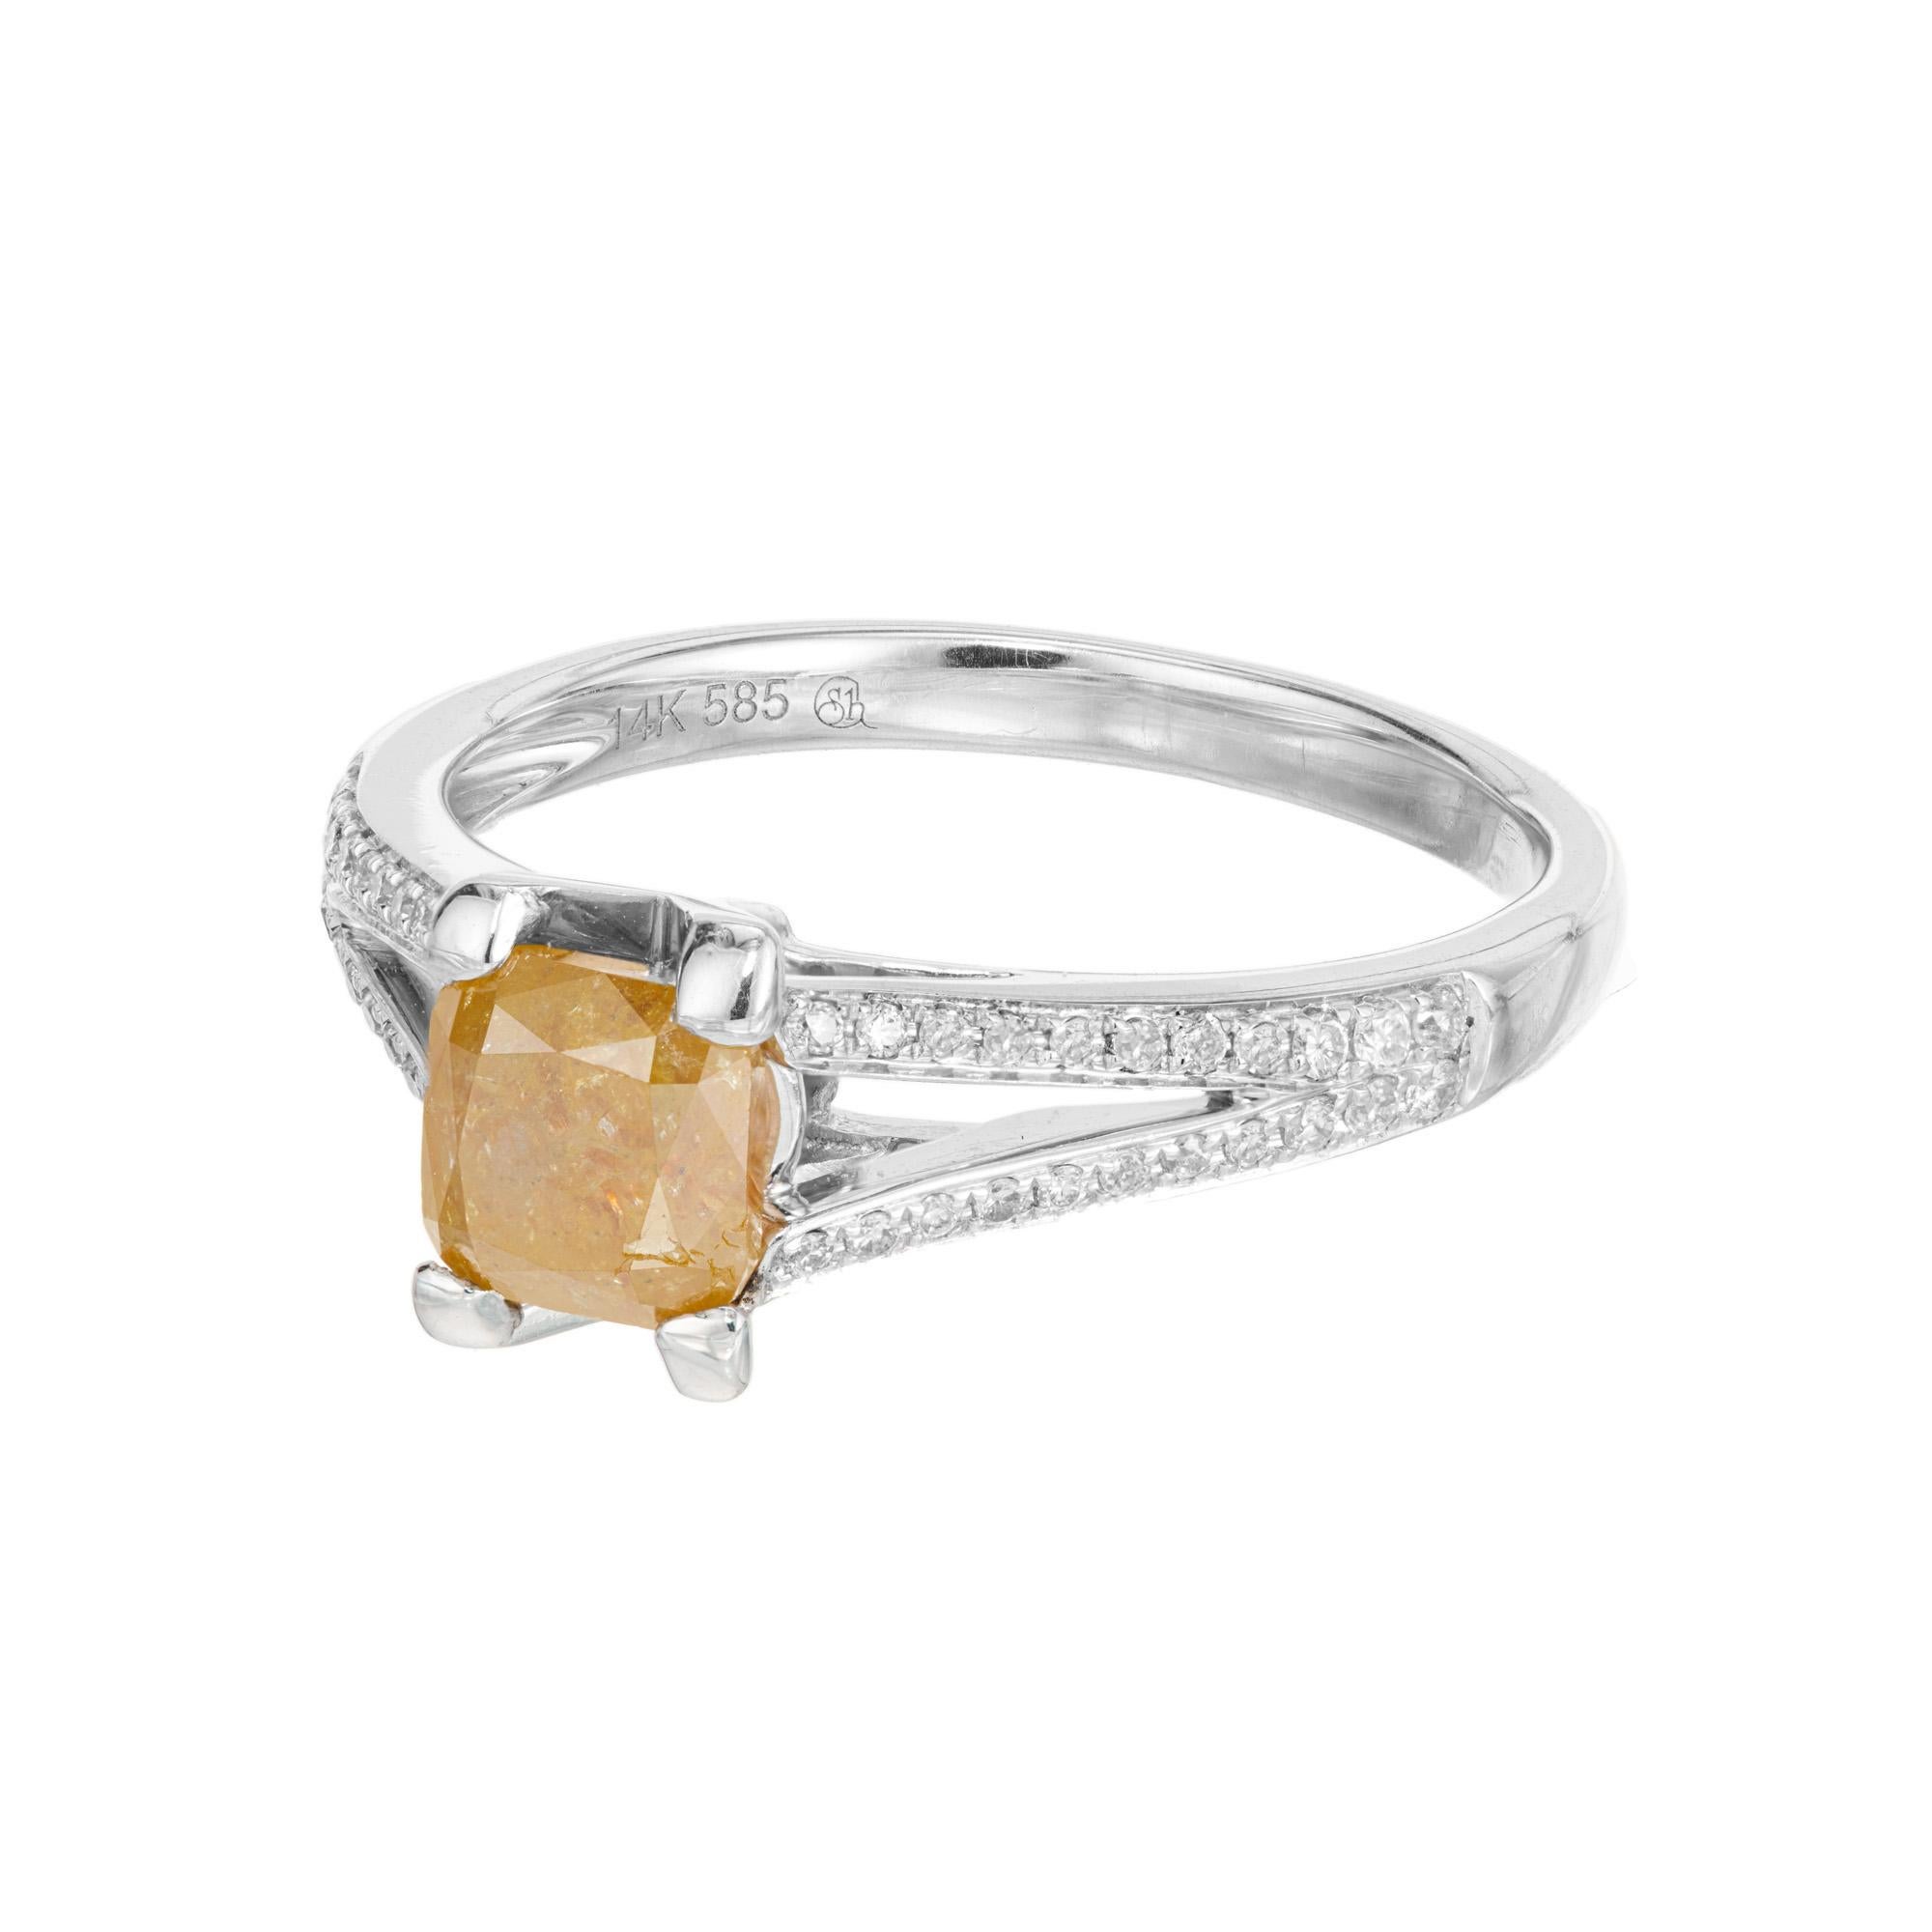 Yellow diamond engagement ring. This GIA certified natural color cushion square cut yellow center diamond, is set in a 14k white gold split shank setting, accented with a total of 44 round cut diamonds along each row of the shank. This is a very